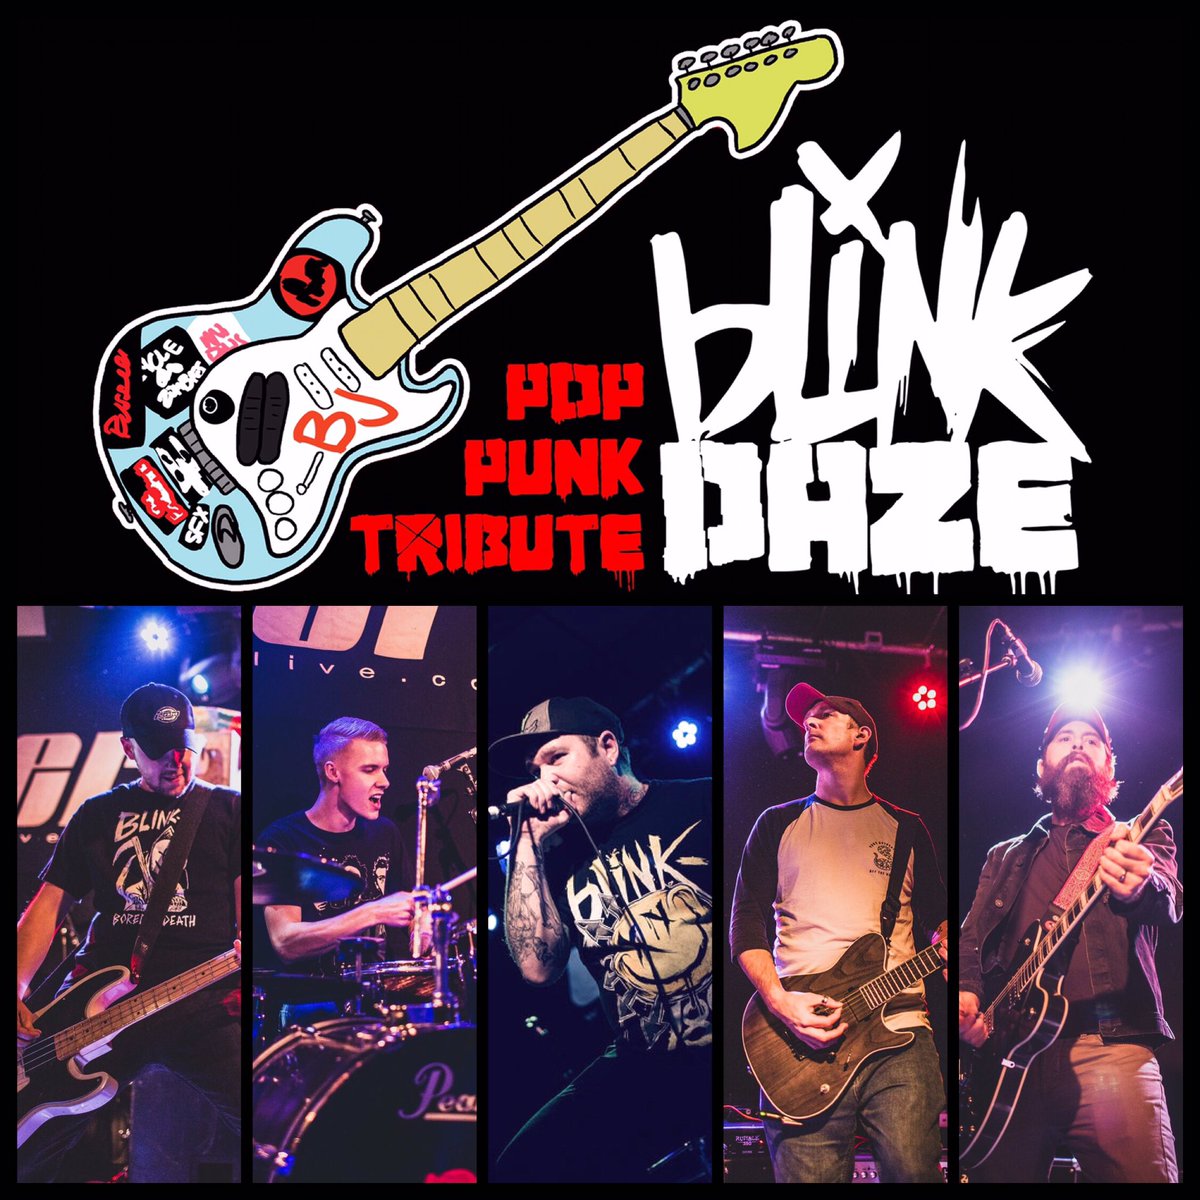 Check out blinkdaze.com/gigs for all upcoming gig dates and come and join the POP PUNK PARTY! 🤘🏼 #PopPunk #PopPunkParty #UKPopPunk #PopPunksNotDead #DefendPopPunk #PopPunkTribute #GreenDay #Blink182 #TheOffspring #Sum41 #NewFoundGlory #BowlingForSoup #FallOutBoy